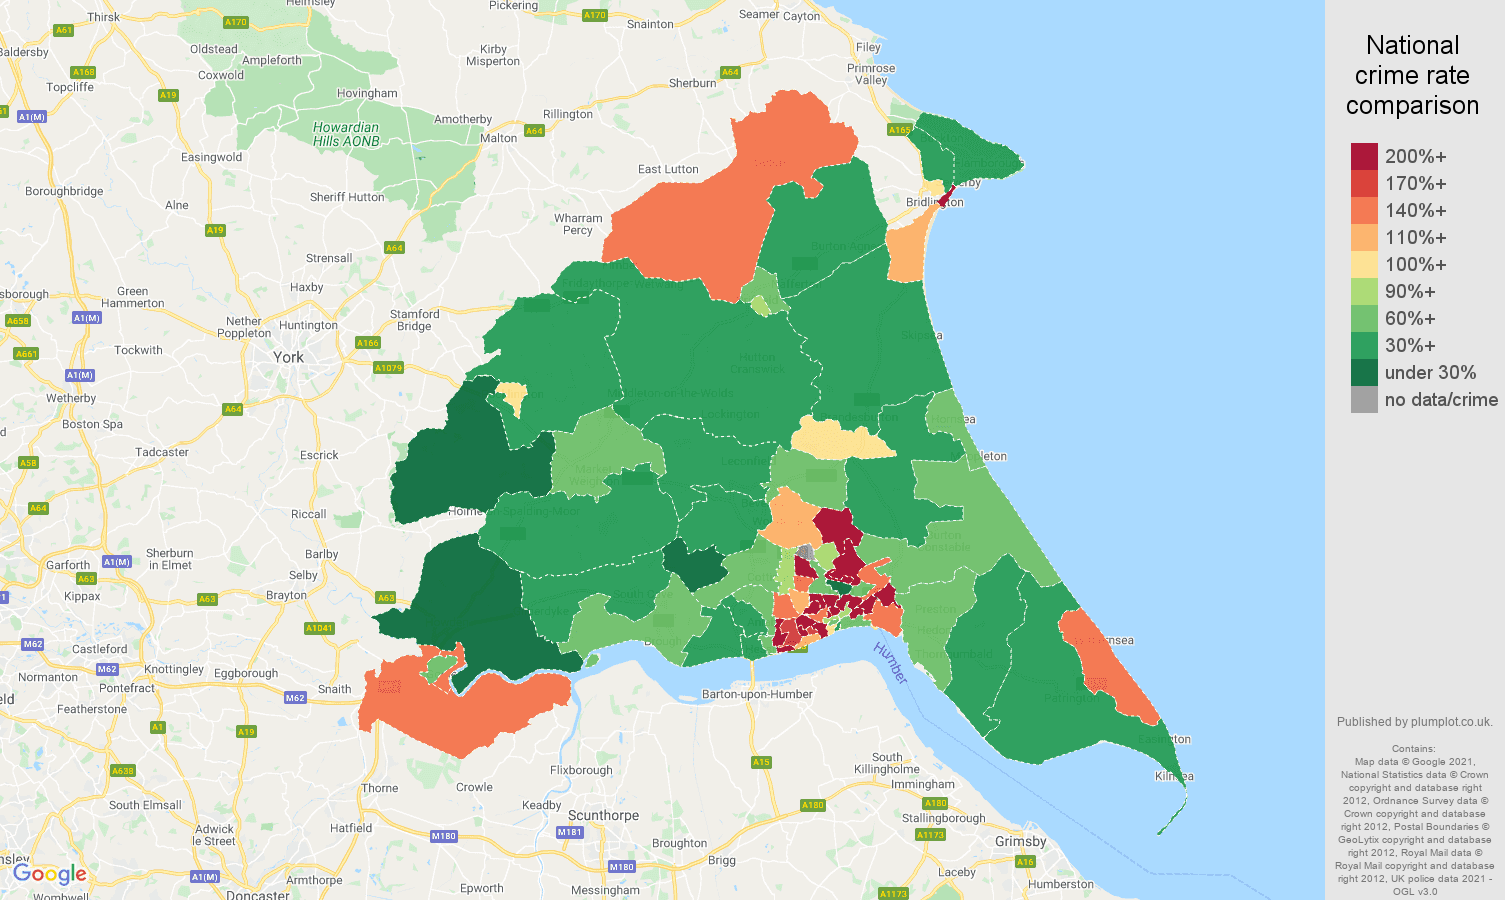 East Riding of Yorkshire criminal damage and arson crime rate comparison map